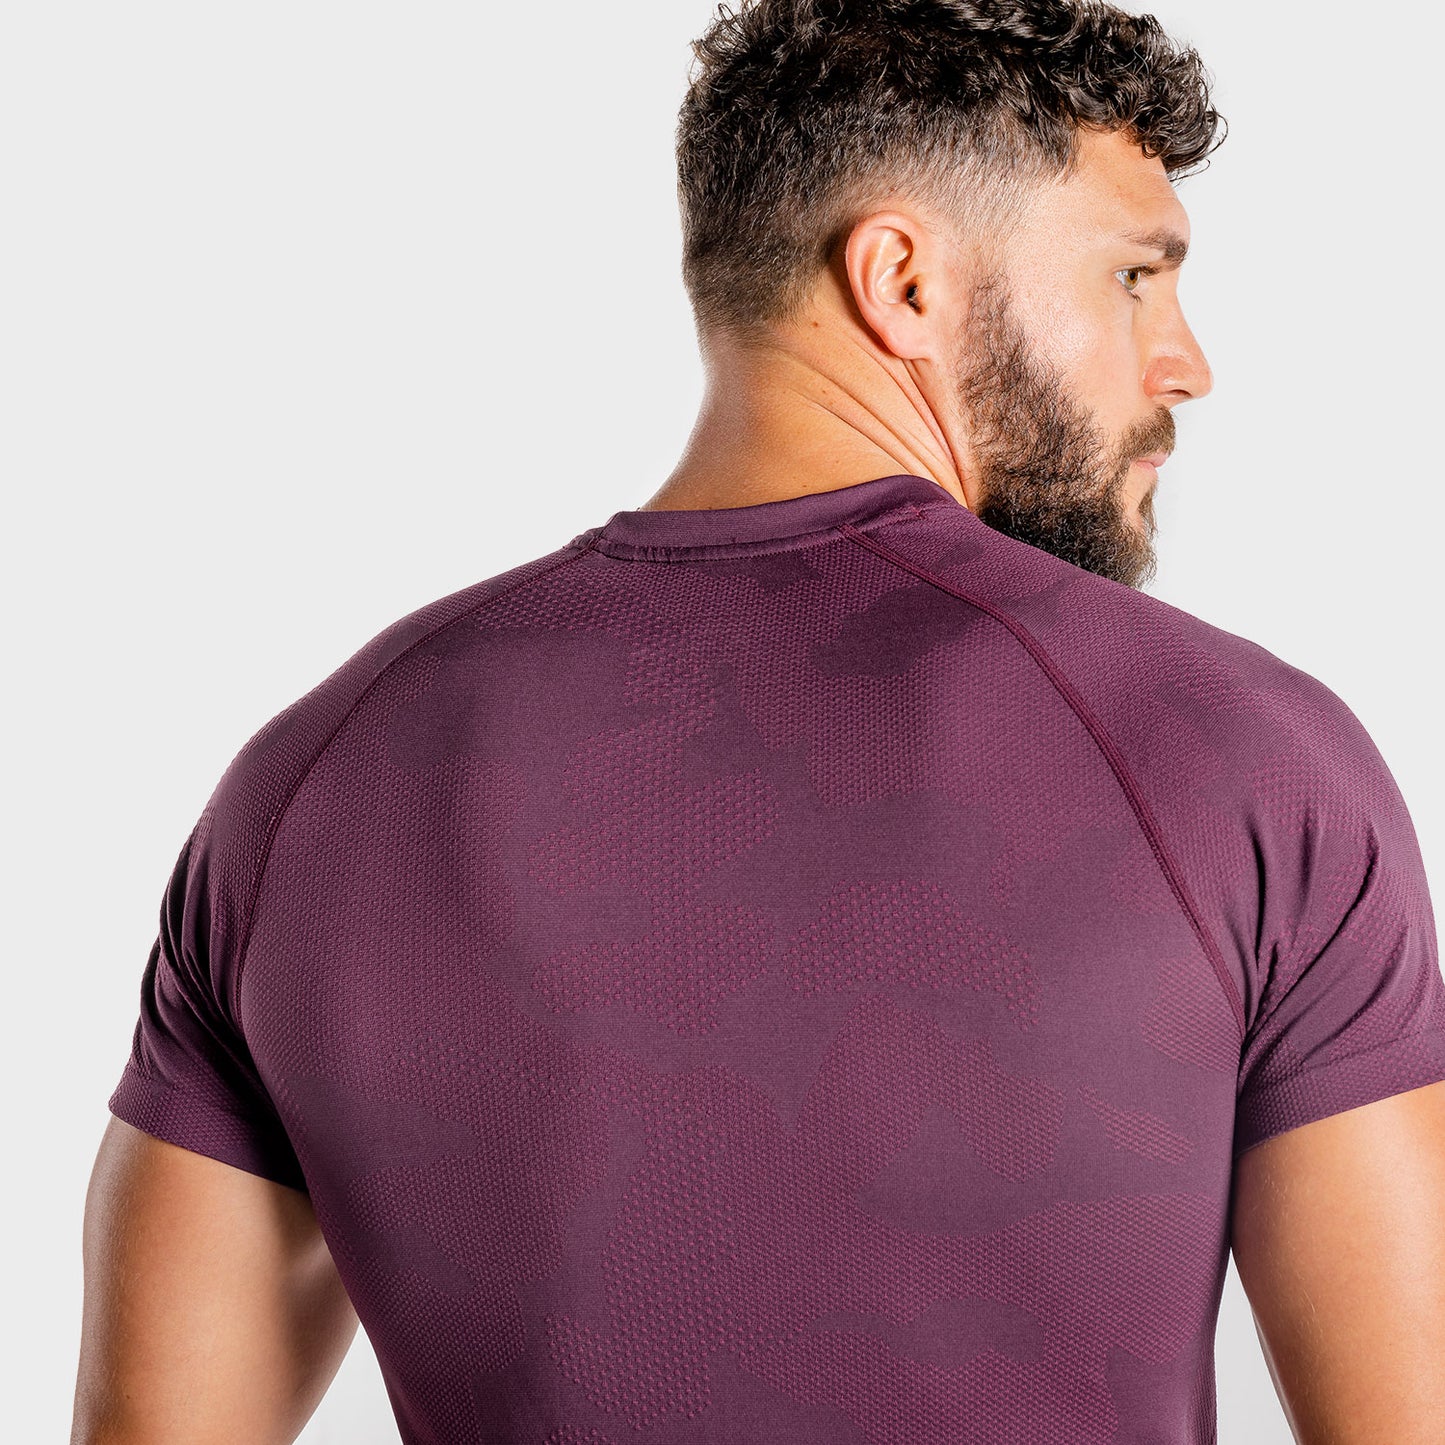 squatwolf-workout-shirts-for-men-wolf-seamless-workout-tee-burgundy-gym-wear